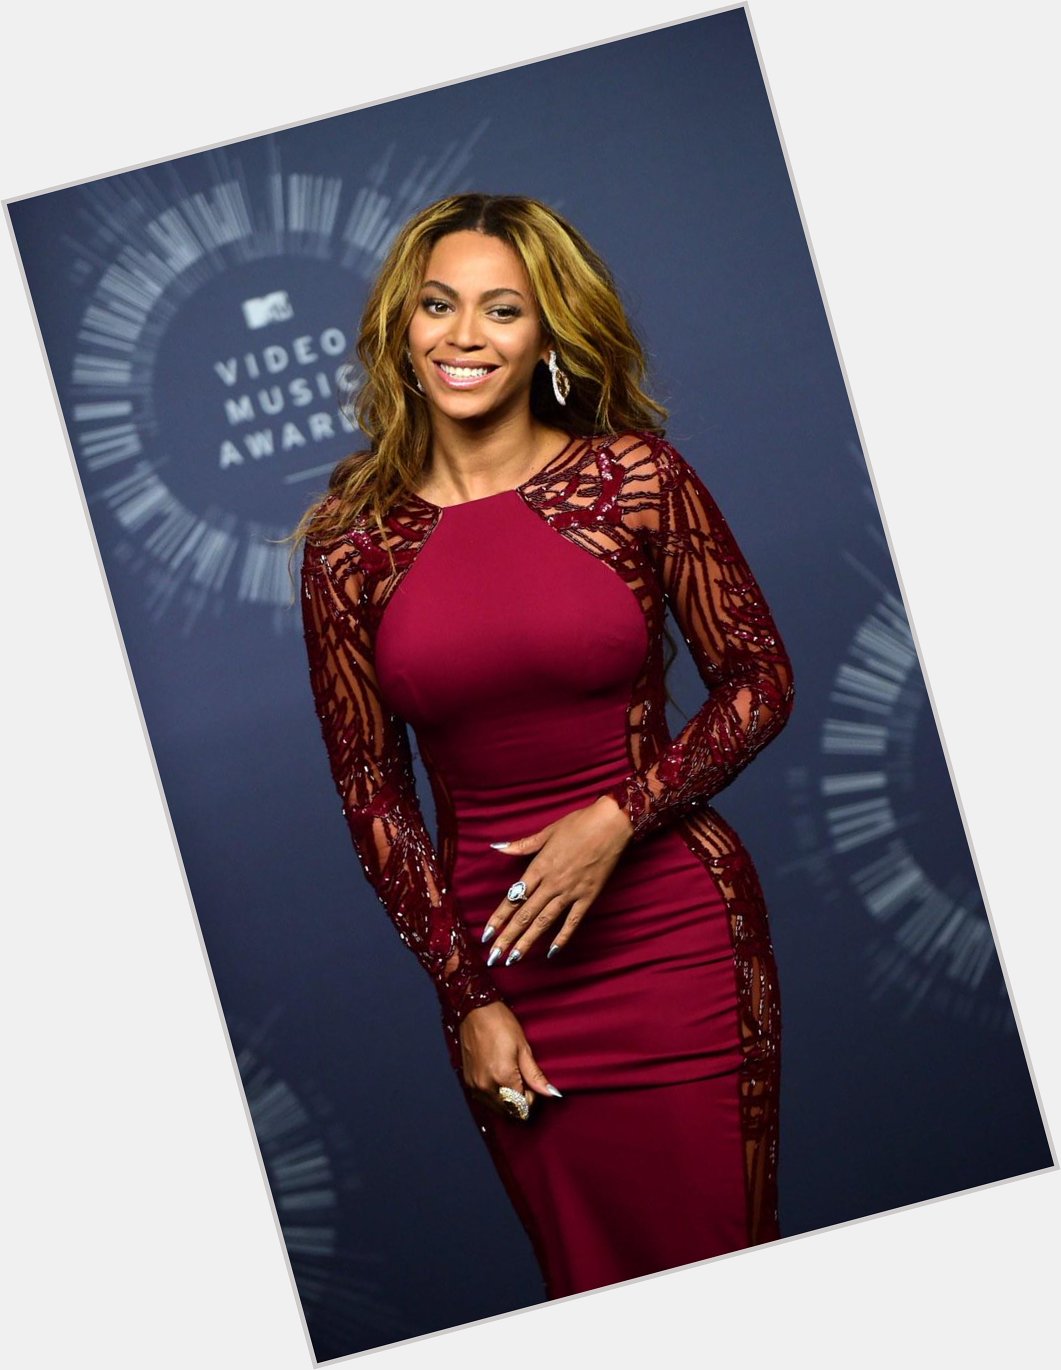 Happy Birthday to Beyonce Knowles, who turns 34 today! 